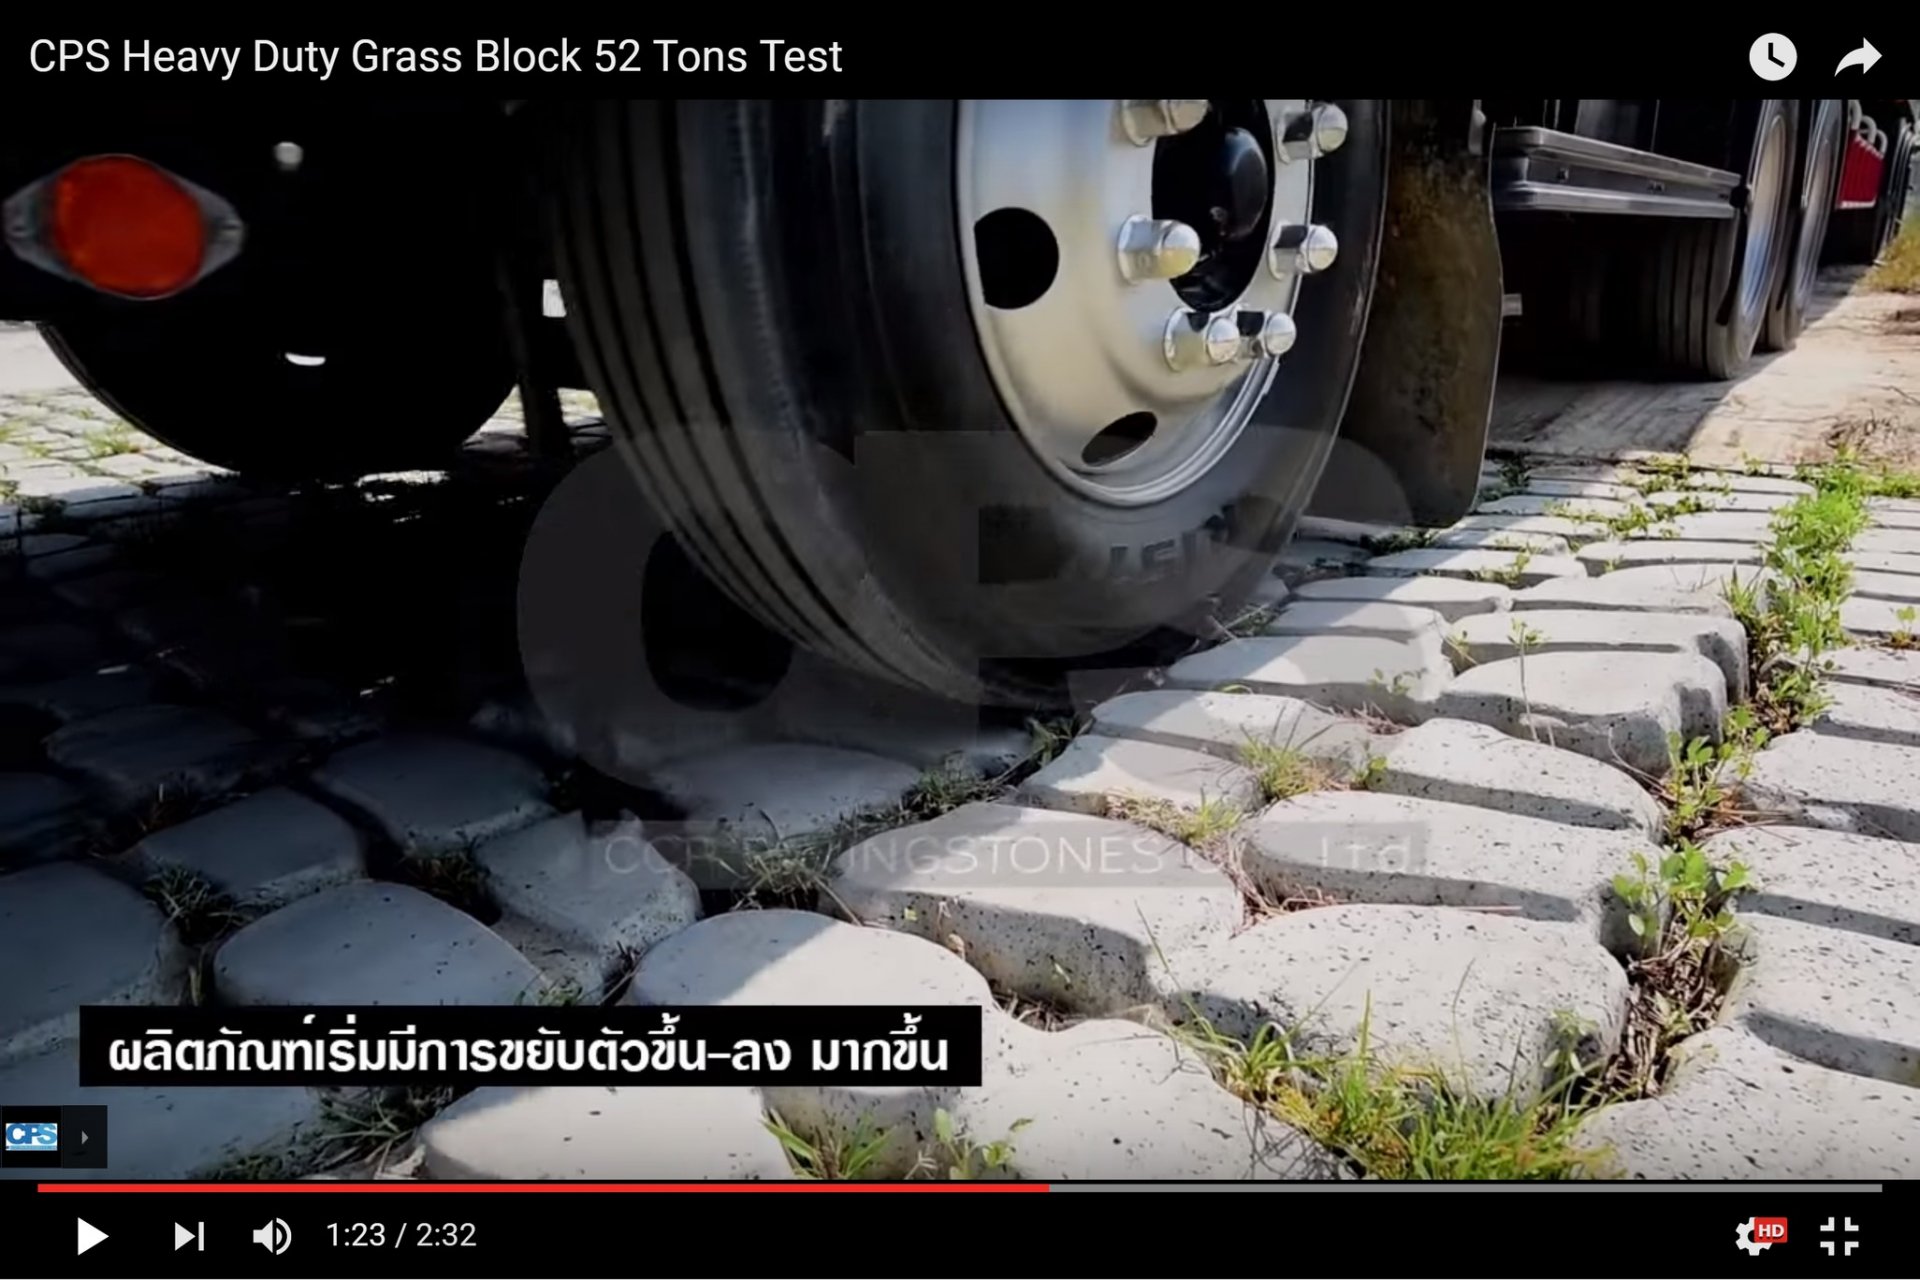 CPS Grass Block 52 Tons Load Test